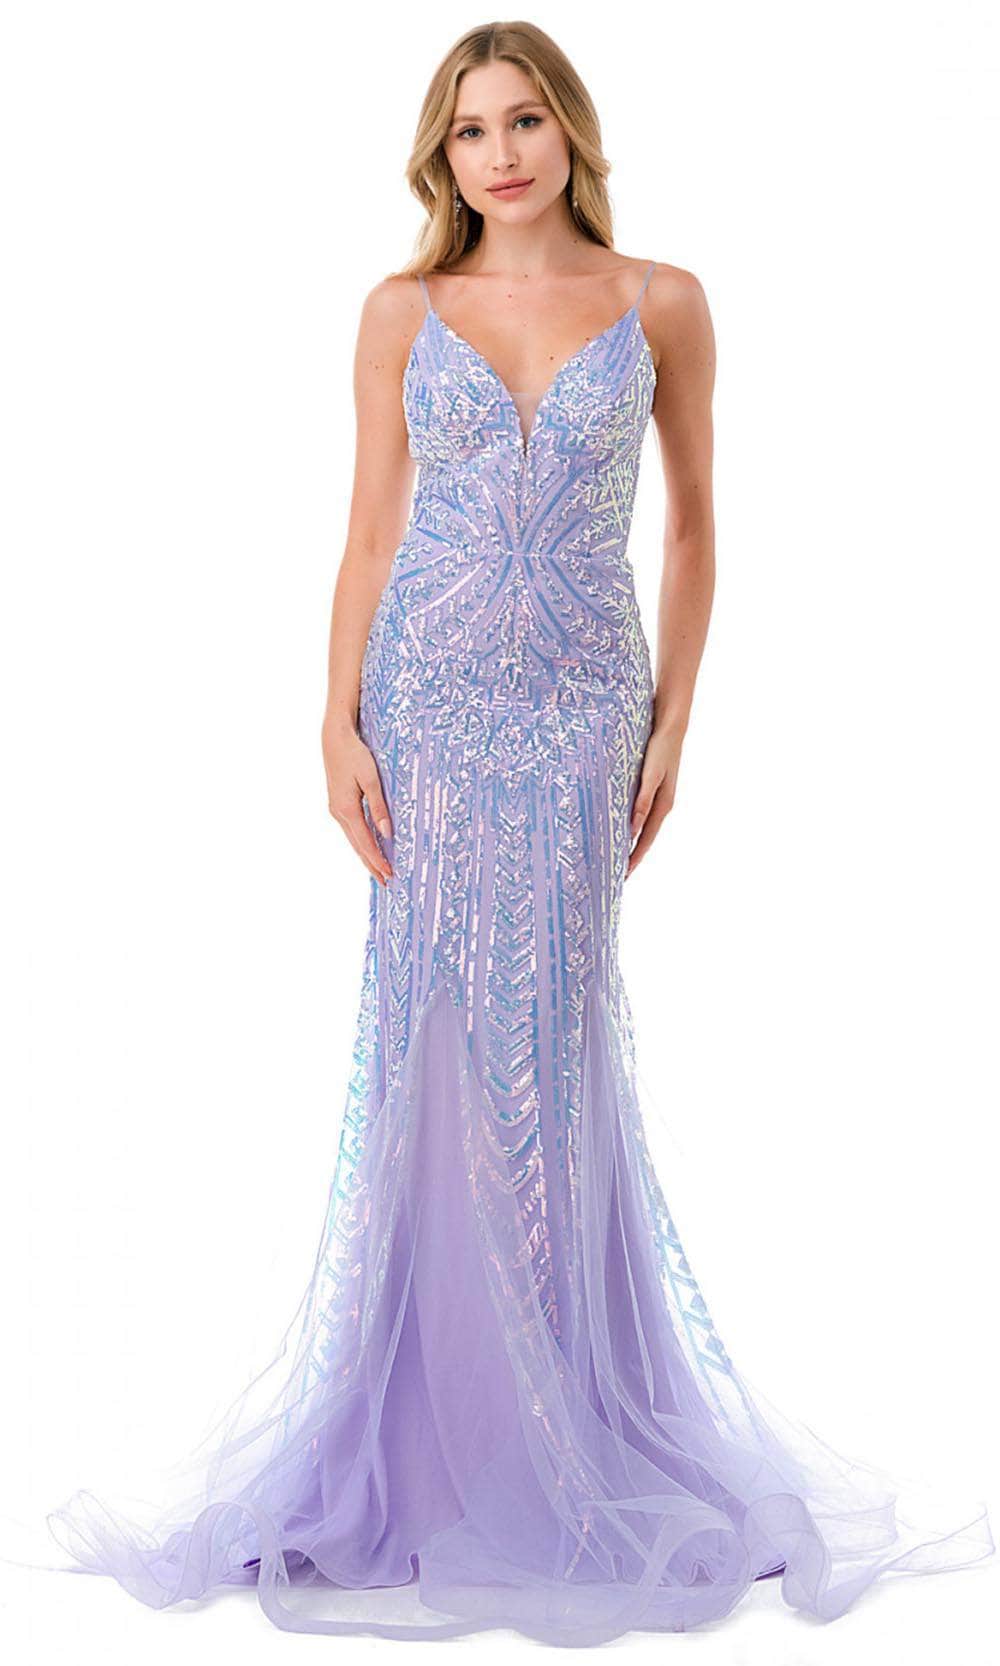 Aspeed Design L2816J - Sequined Mermaid Evening Gown Special Occasion Dress